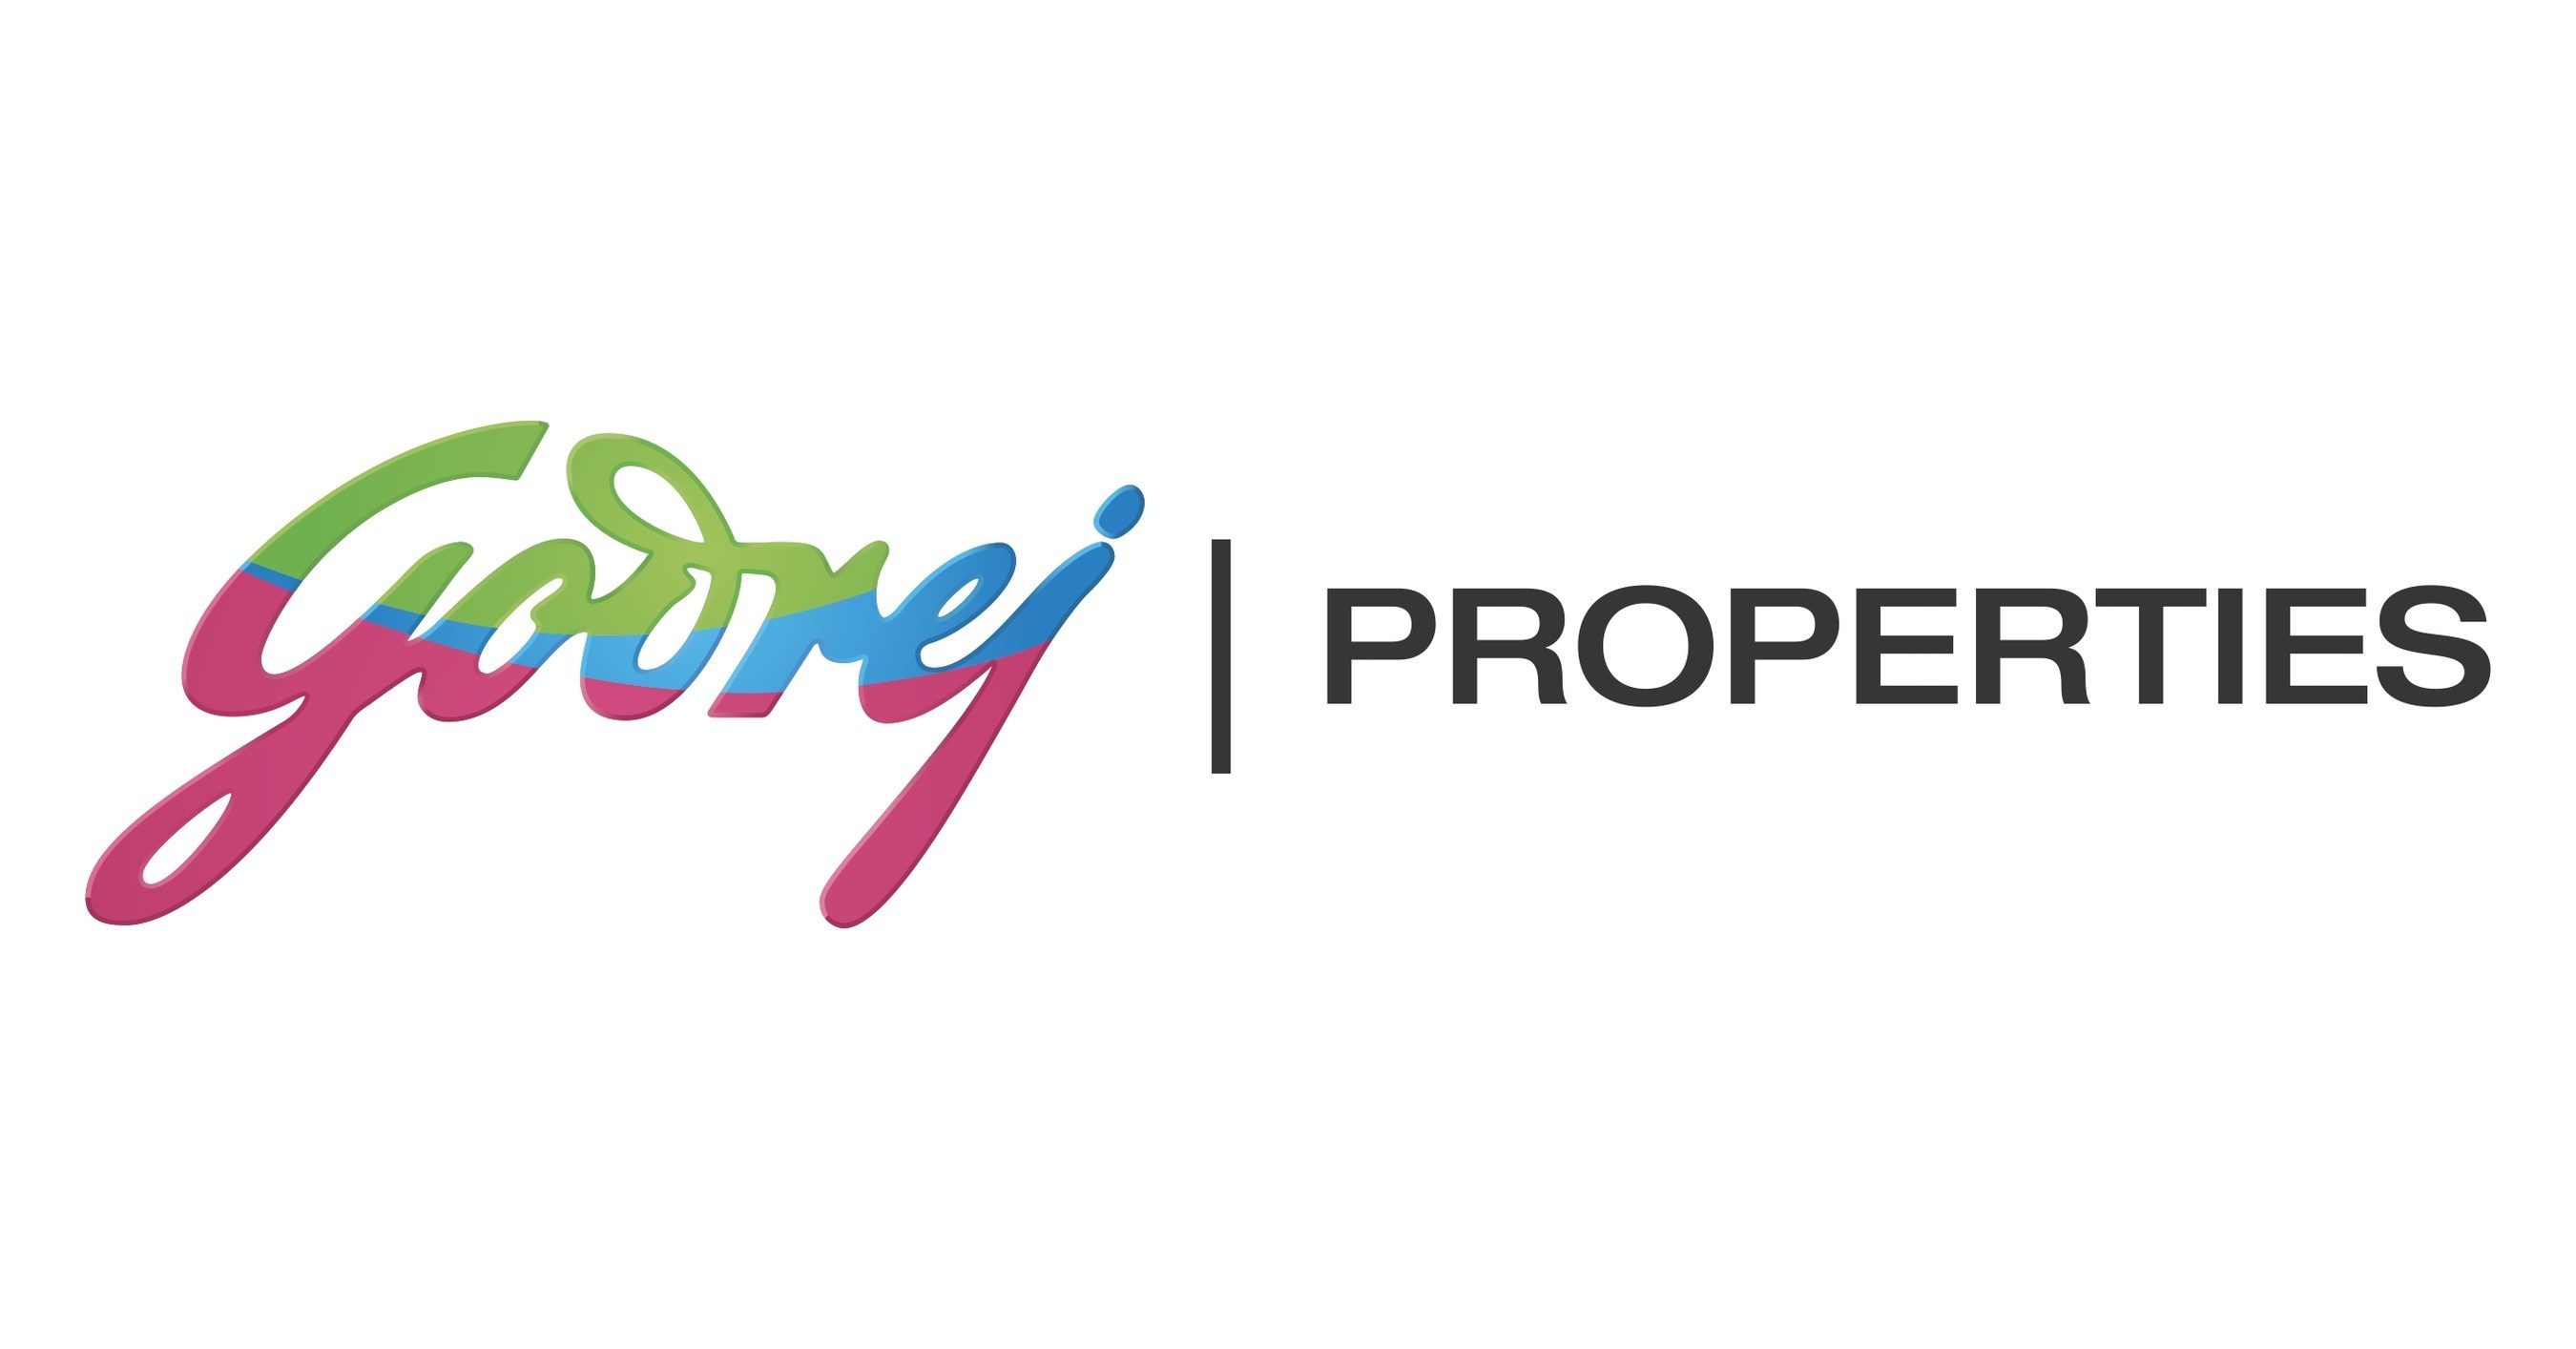 Godrej Properties Q3 Booking Value Grows by 111% YoY